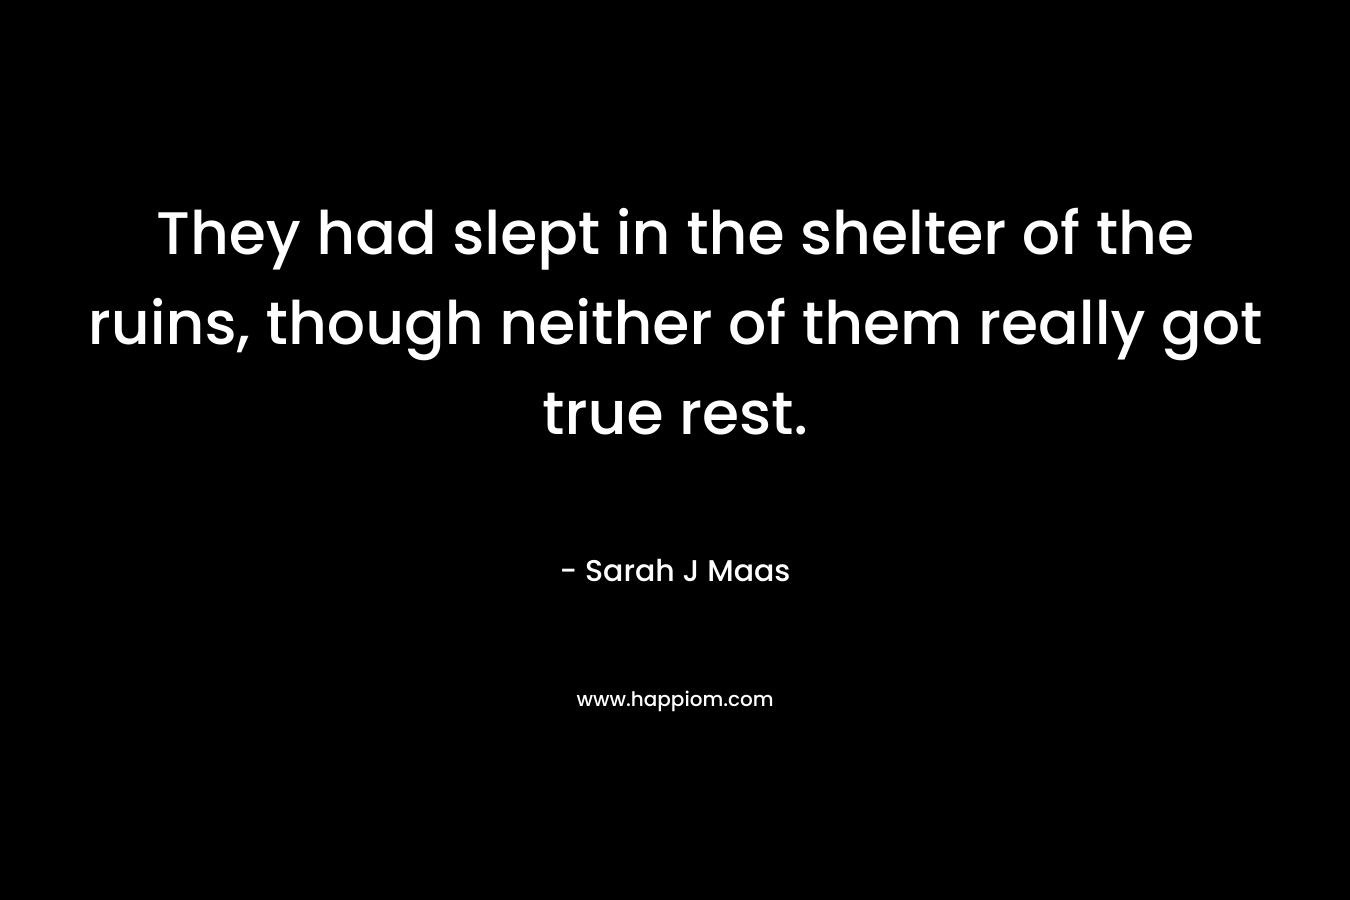 They had slept in the shelter of the ruins, though neither of them really got true rest. – Sarah J Maas